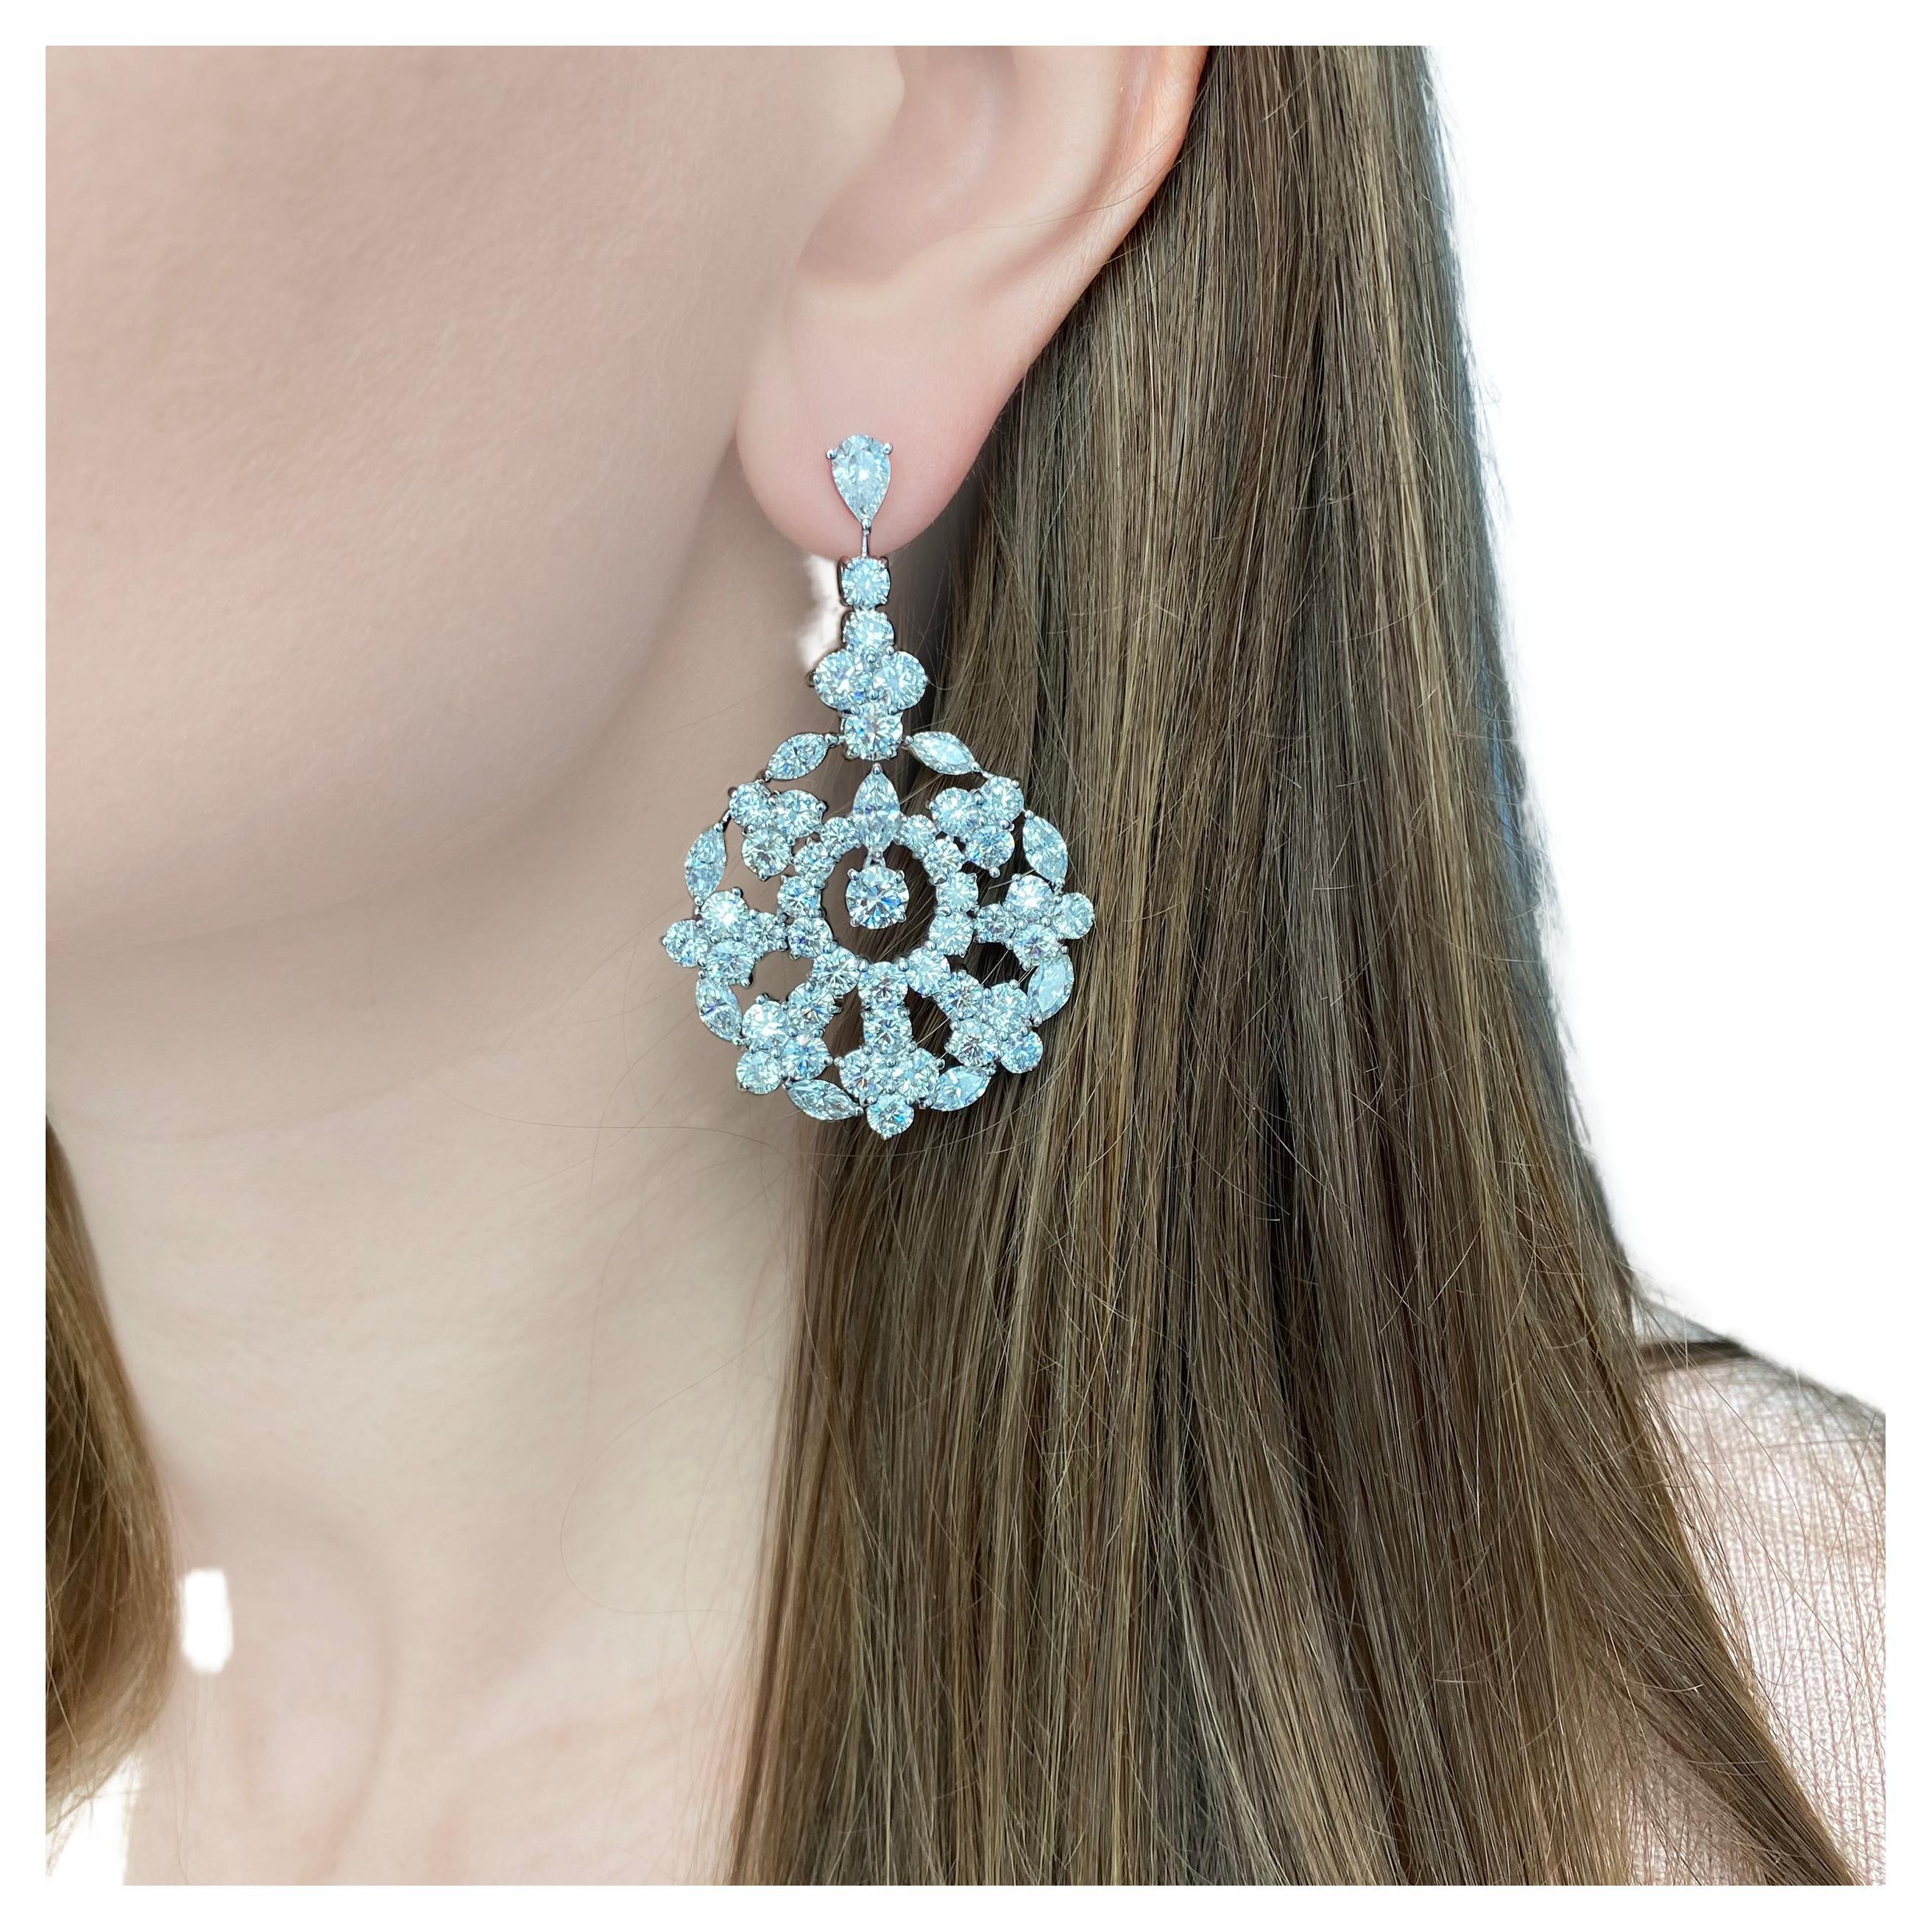 Graff Diamond 'Snowflake' Earrings This pair of earrings has pear, marquise and circular-cut
diamonds weighing total approximately 28.36 carats of very fine quality diamonds all set in 18k white gold, signed Graff, no xxxx, comes with Graff pouch.
